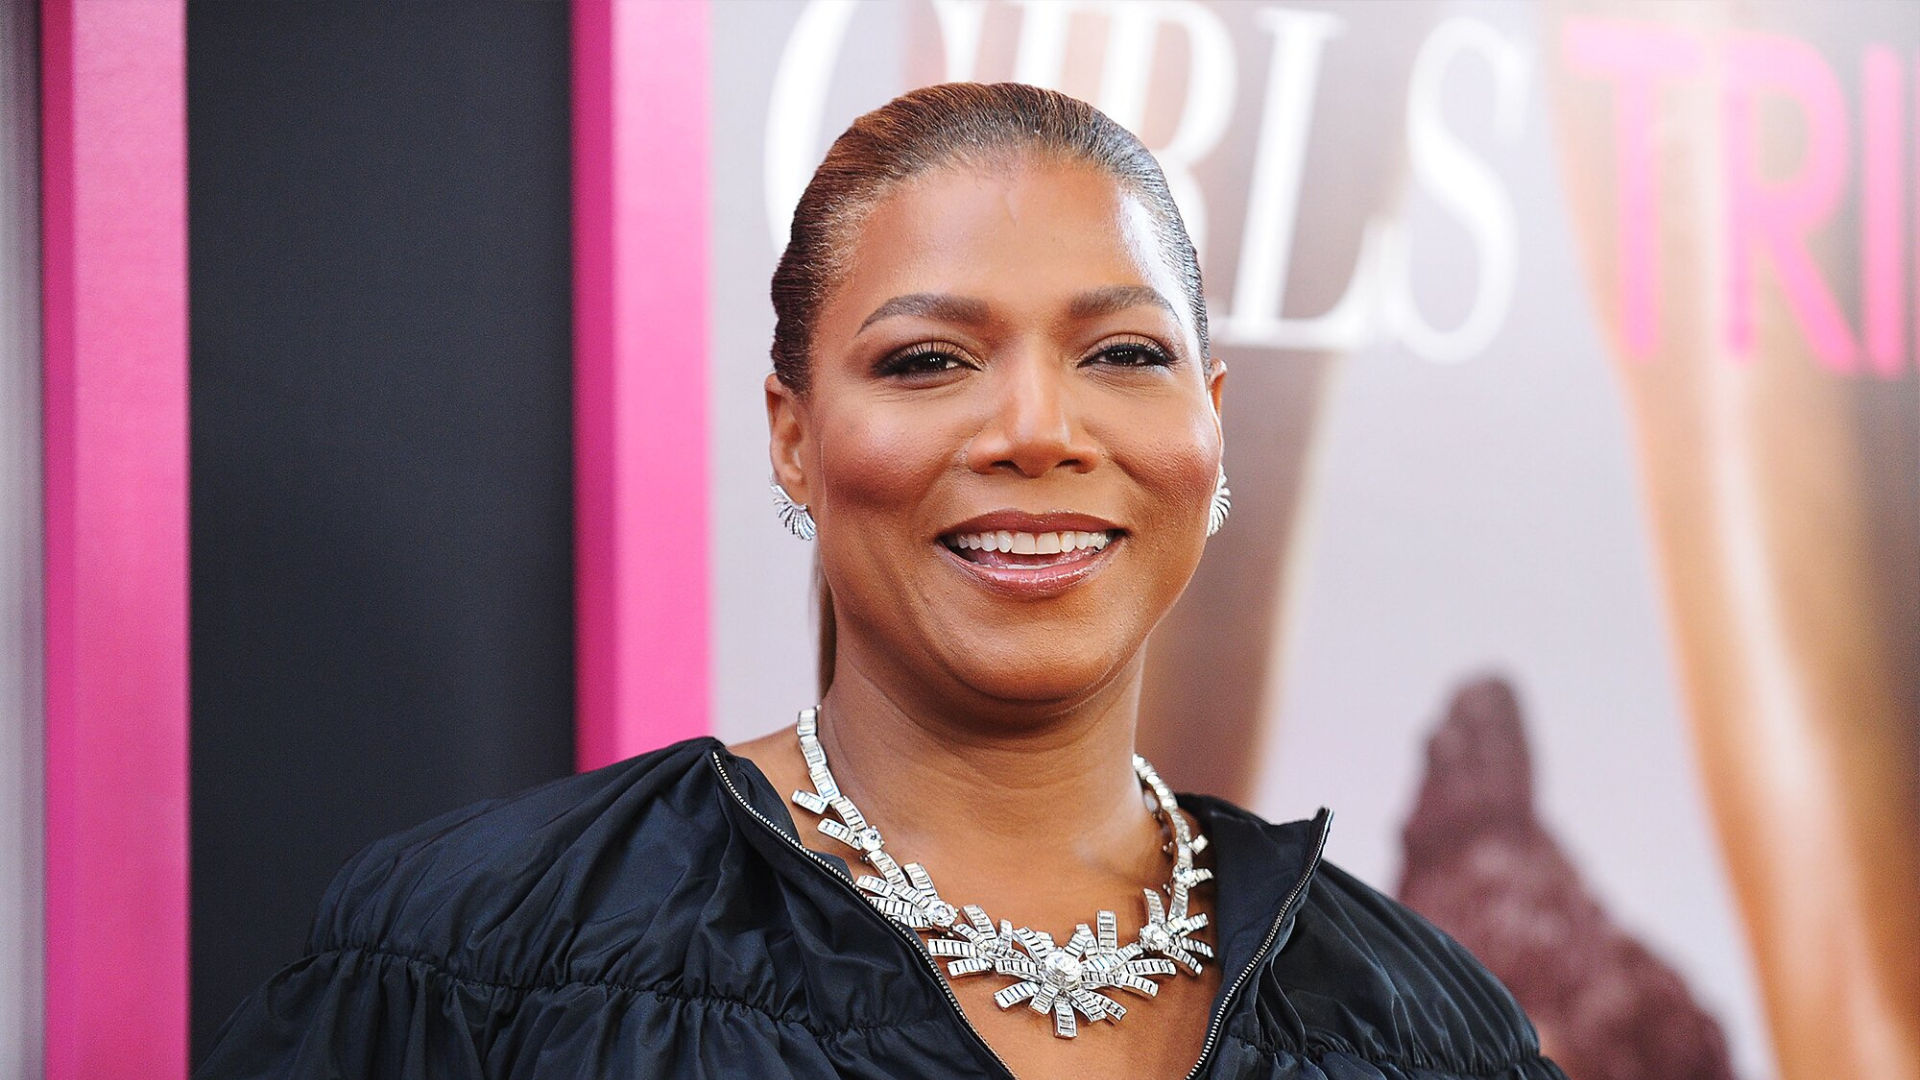 queen-latifah-‘practices’-saying-no-to-jobs-that-don’t-align-with-her-health-goals